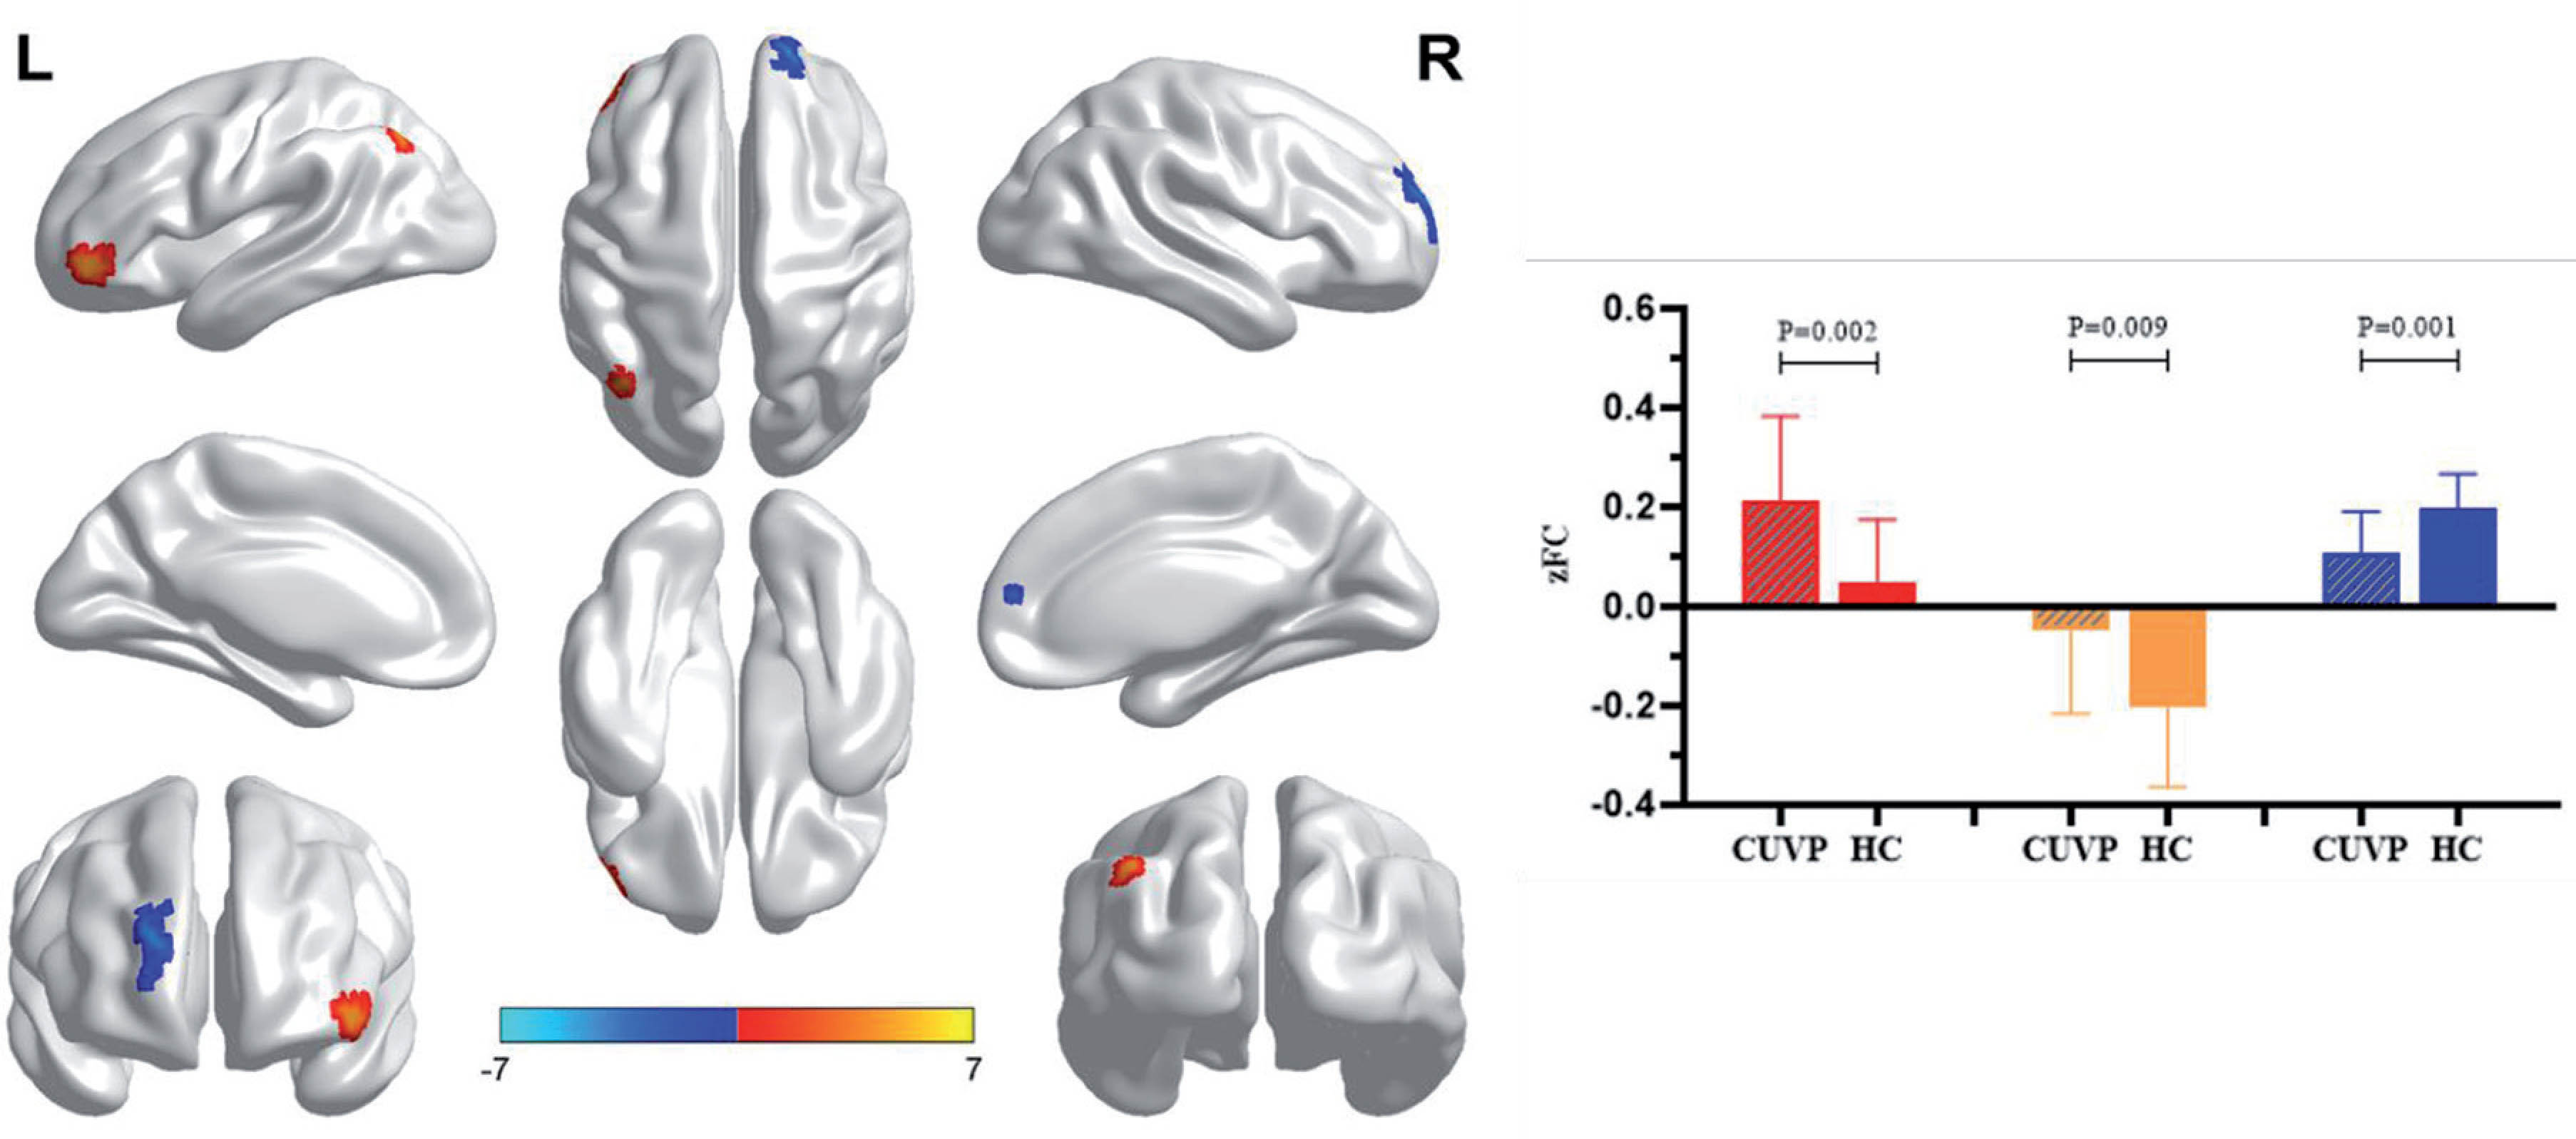 Patients with CUVP demonstrated enhanced FC between the left middle frontal gyrus and left orbital inferior frontal gyrus and left angular gyrus, weakened FC between the right dorsolateral superior frontal gyrus. Compared with healthy controls, the FC between left cingulate gyrus and the left cingulate gyrus was enhanced in patients with CUVP, which overlaps with the gray matter volume enhancement area.